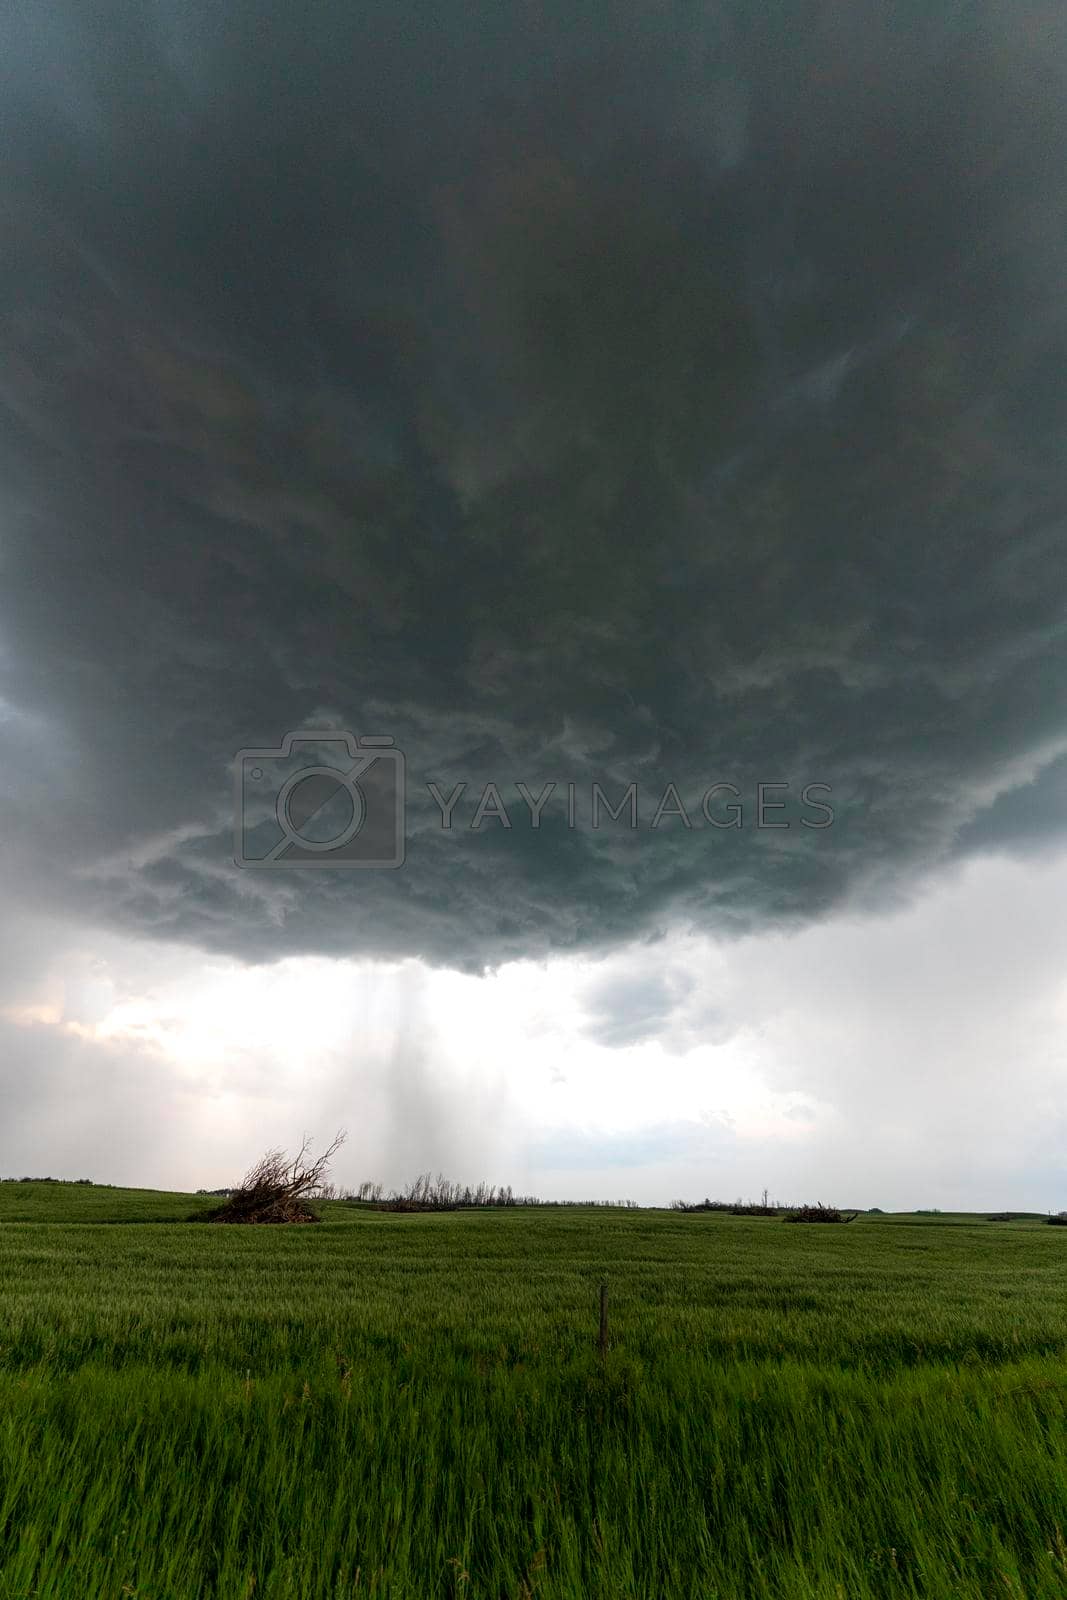 Royalty free image of Prairie Storm Canada by pictureguy